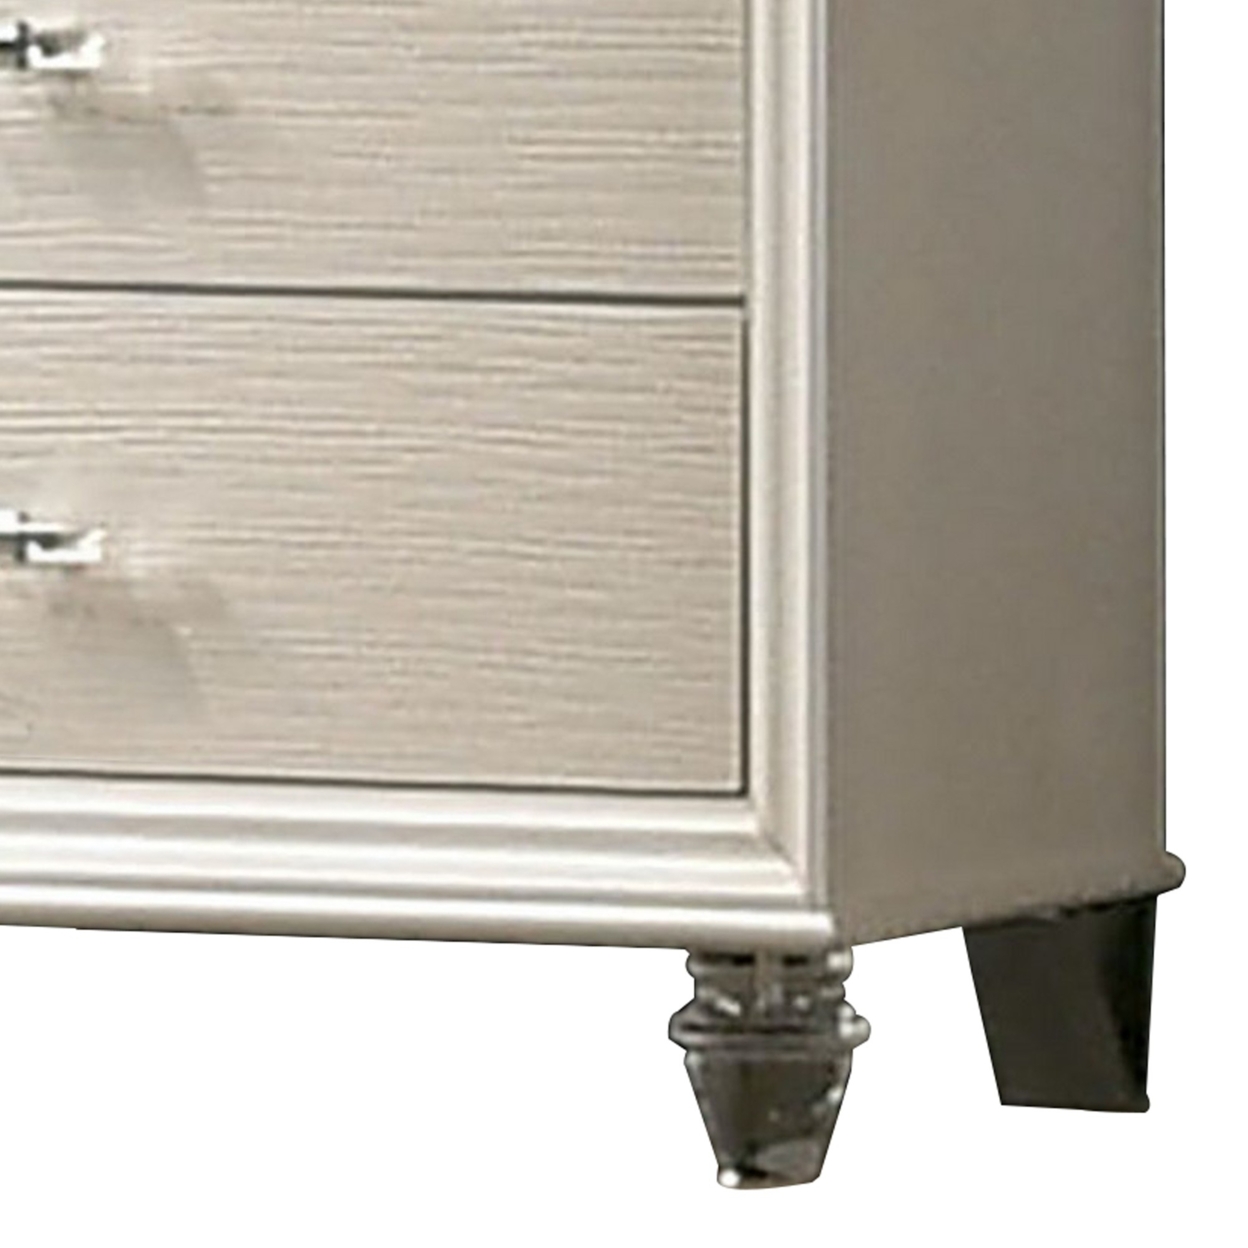 Contemporary Style 4 Drawer Chest With Acrylic Legs, Pearl White- Saltoro Sherpi